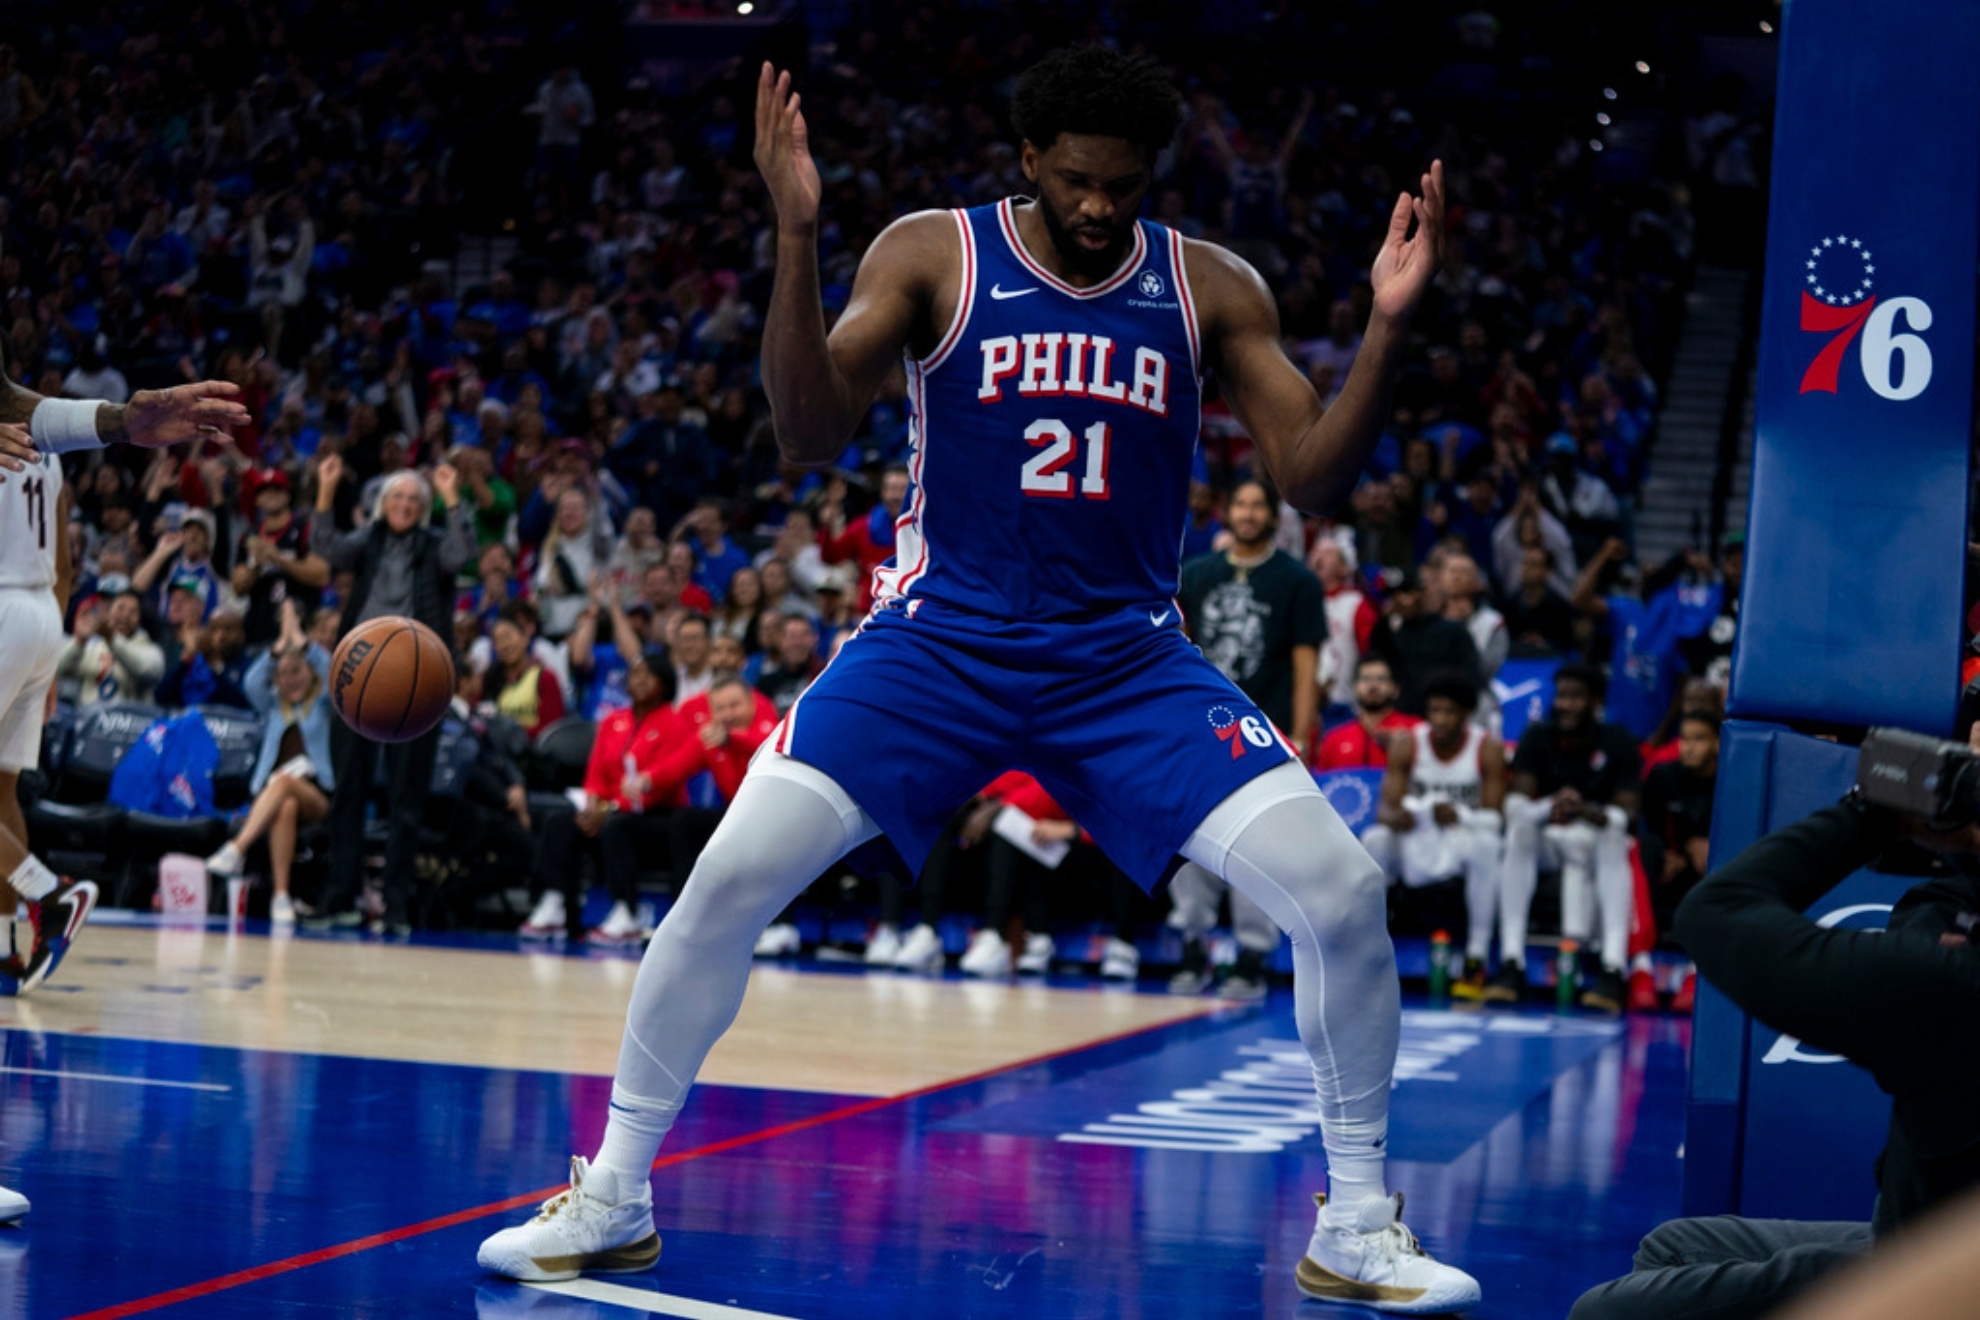 Embiid has started the season where he left off